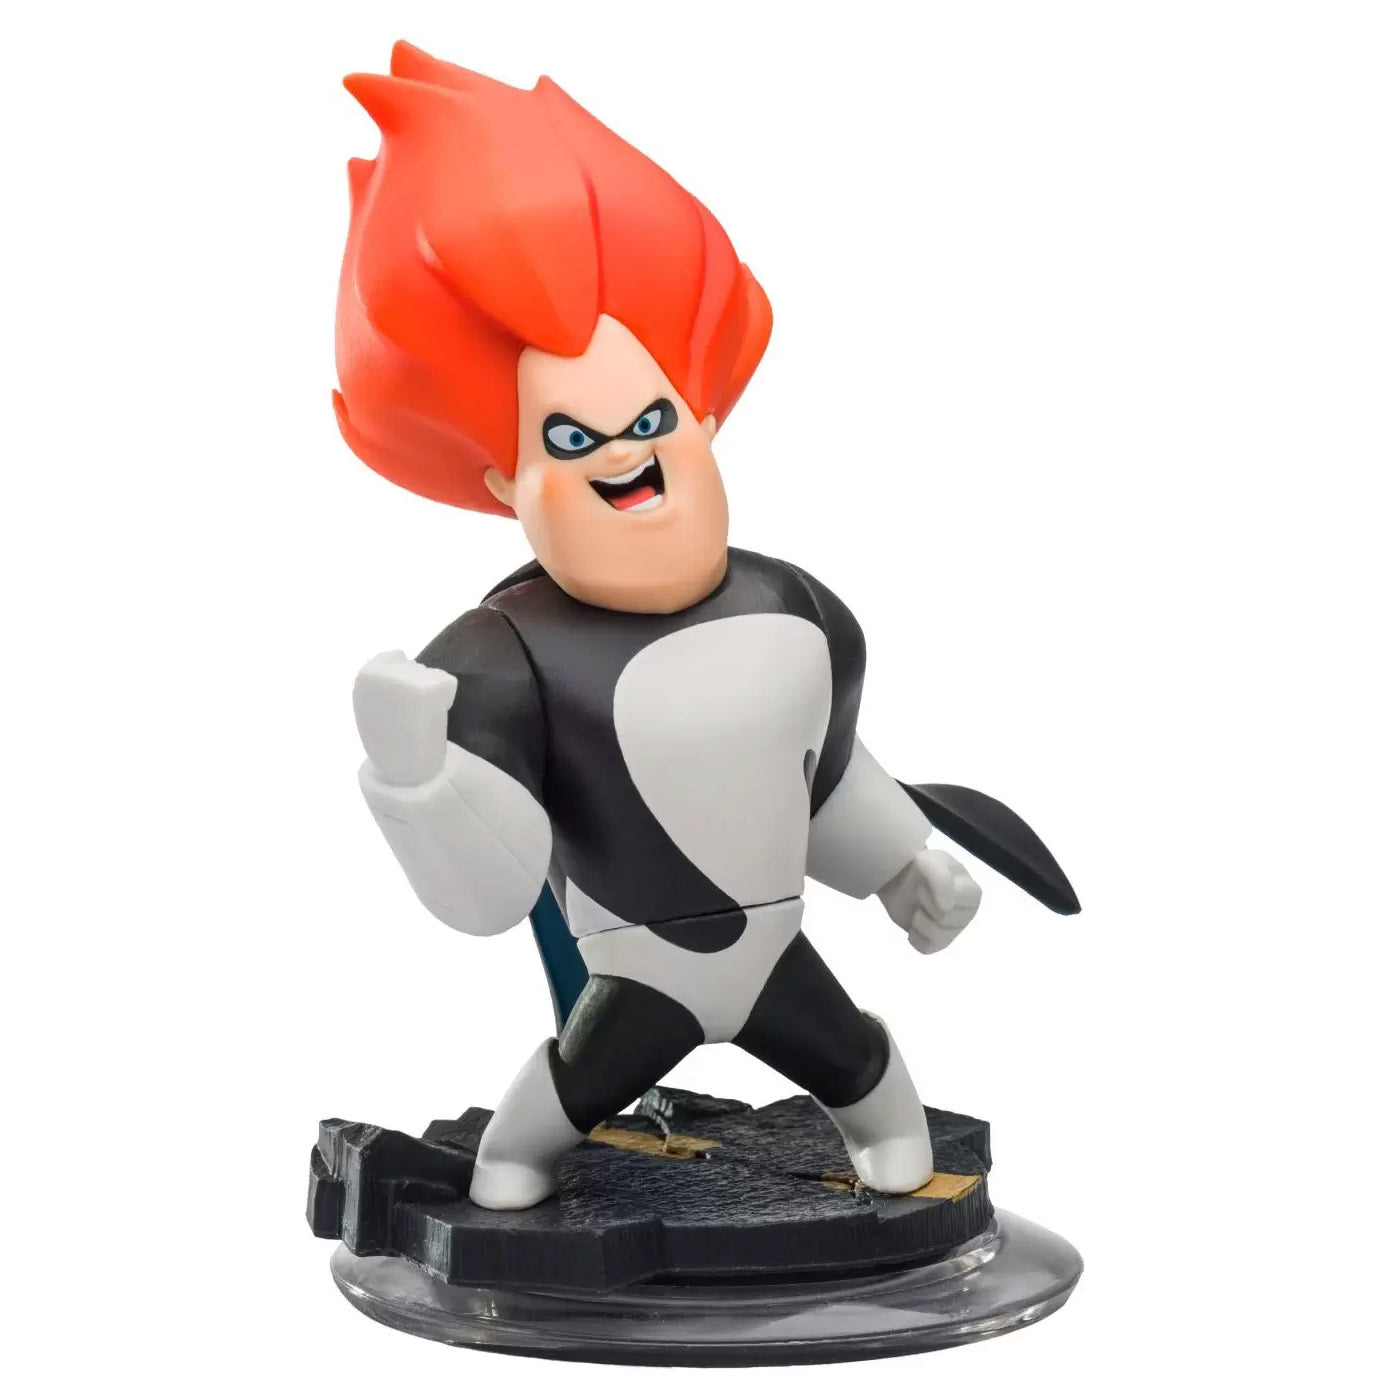 Disney Infinity 1.0 Character: Syndrome